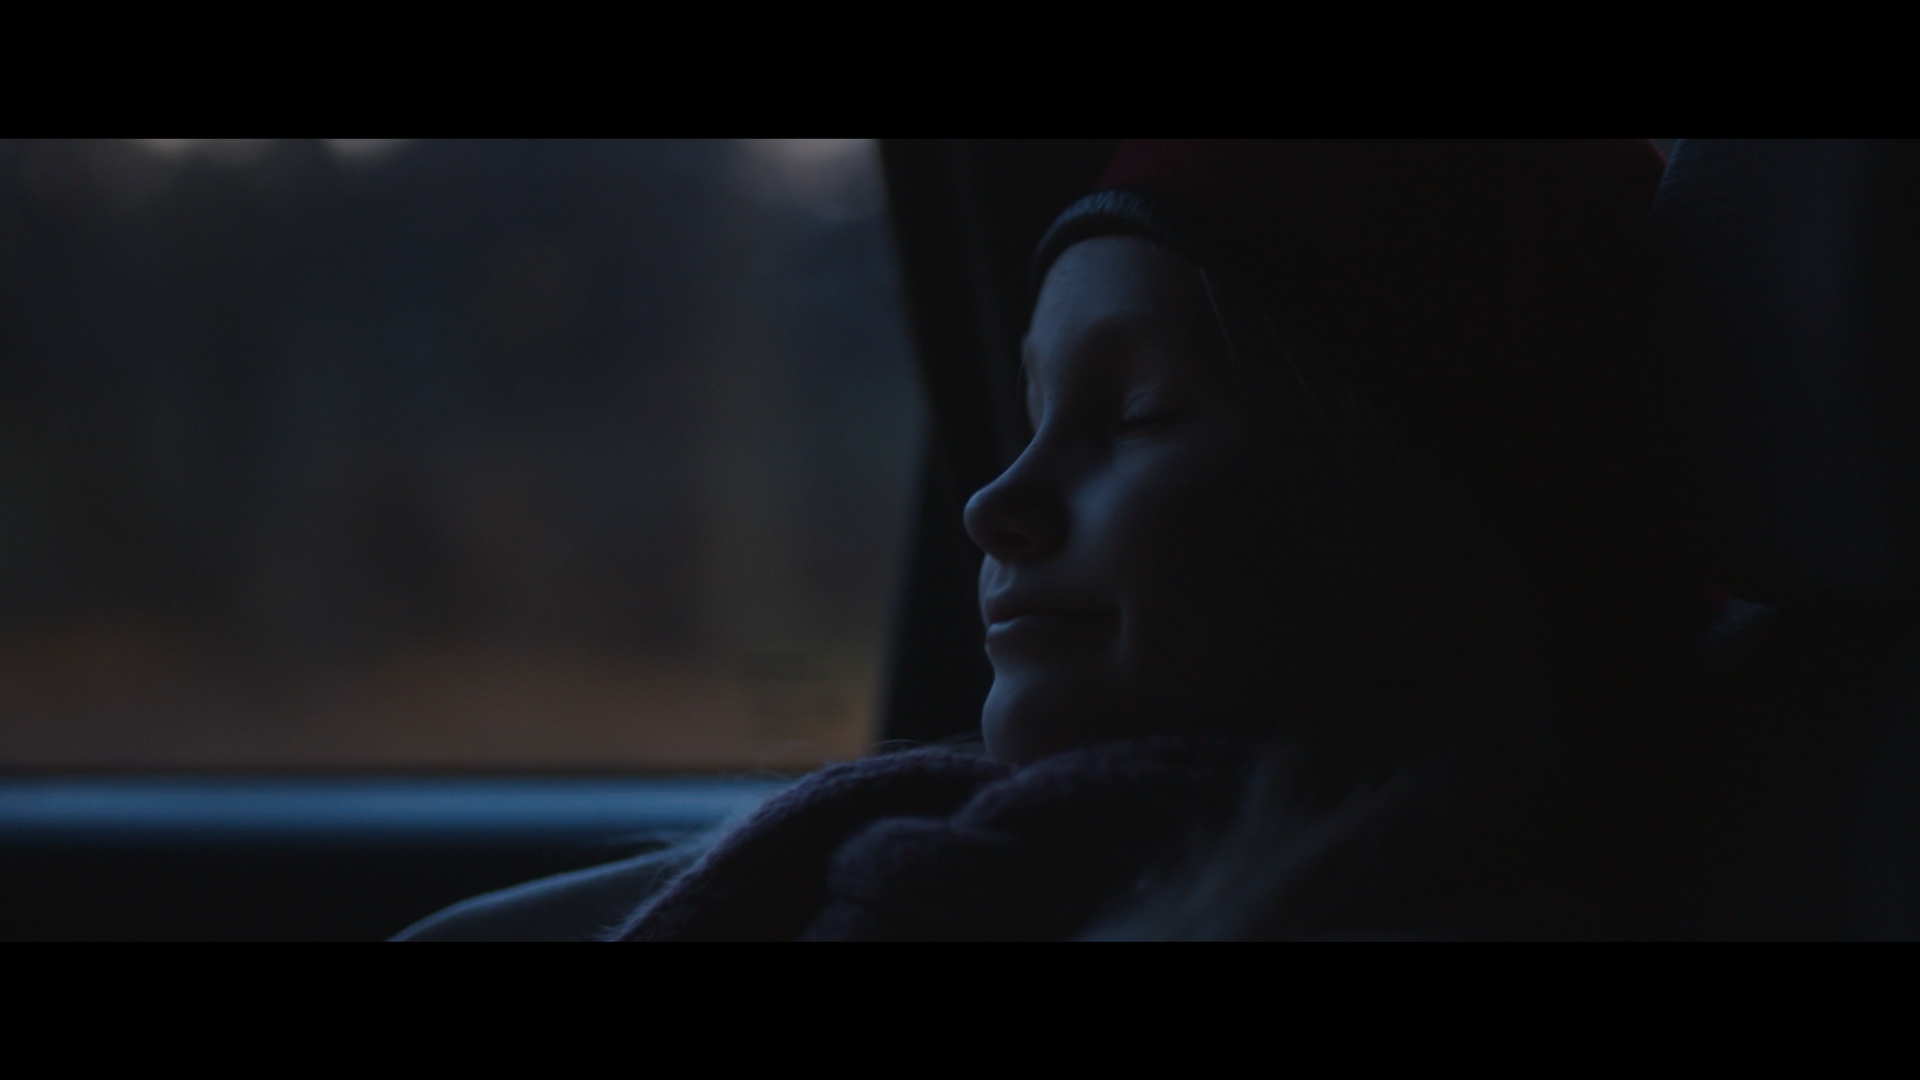 eszter galambos, Little detective is a short film directed by Abishek Singh. cinematographer: Eszter Galambos